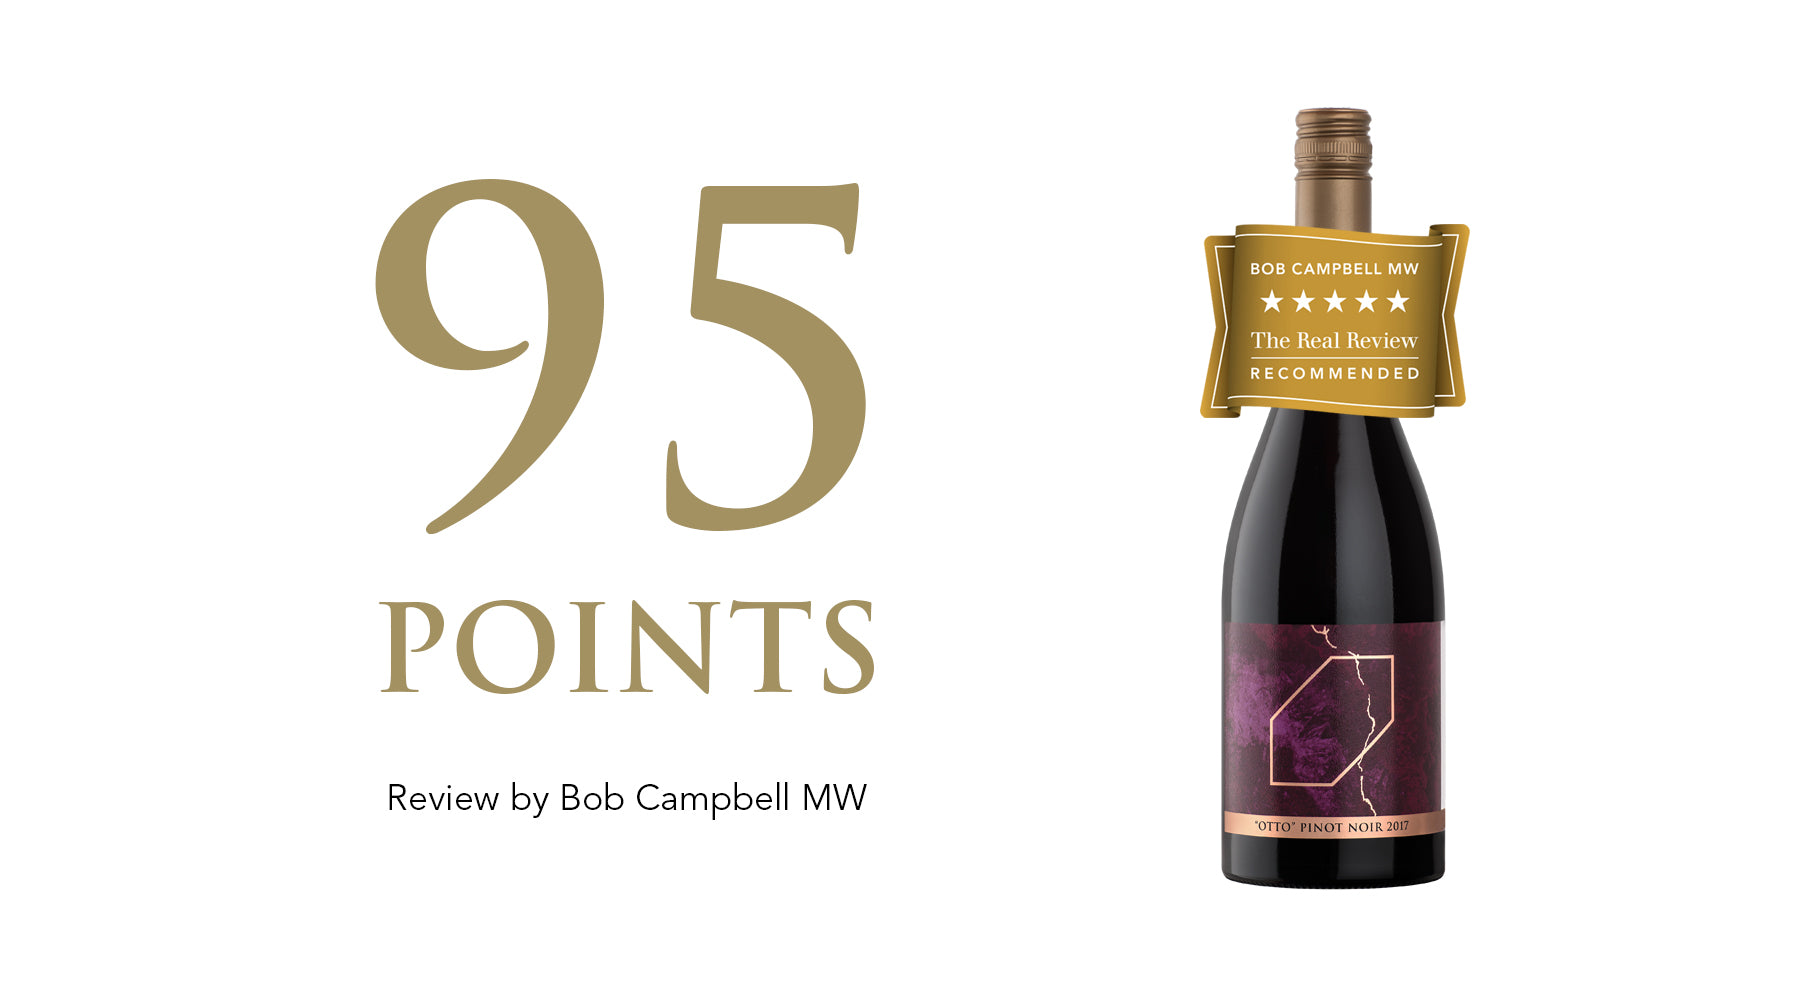 Otto Pinot Noir 2017: Awarded 95 Points and 5 Stars